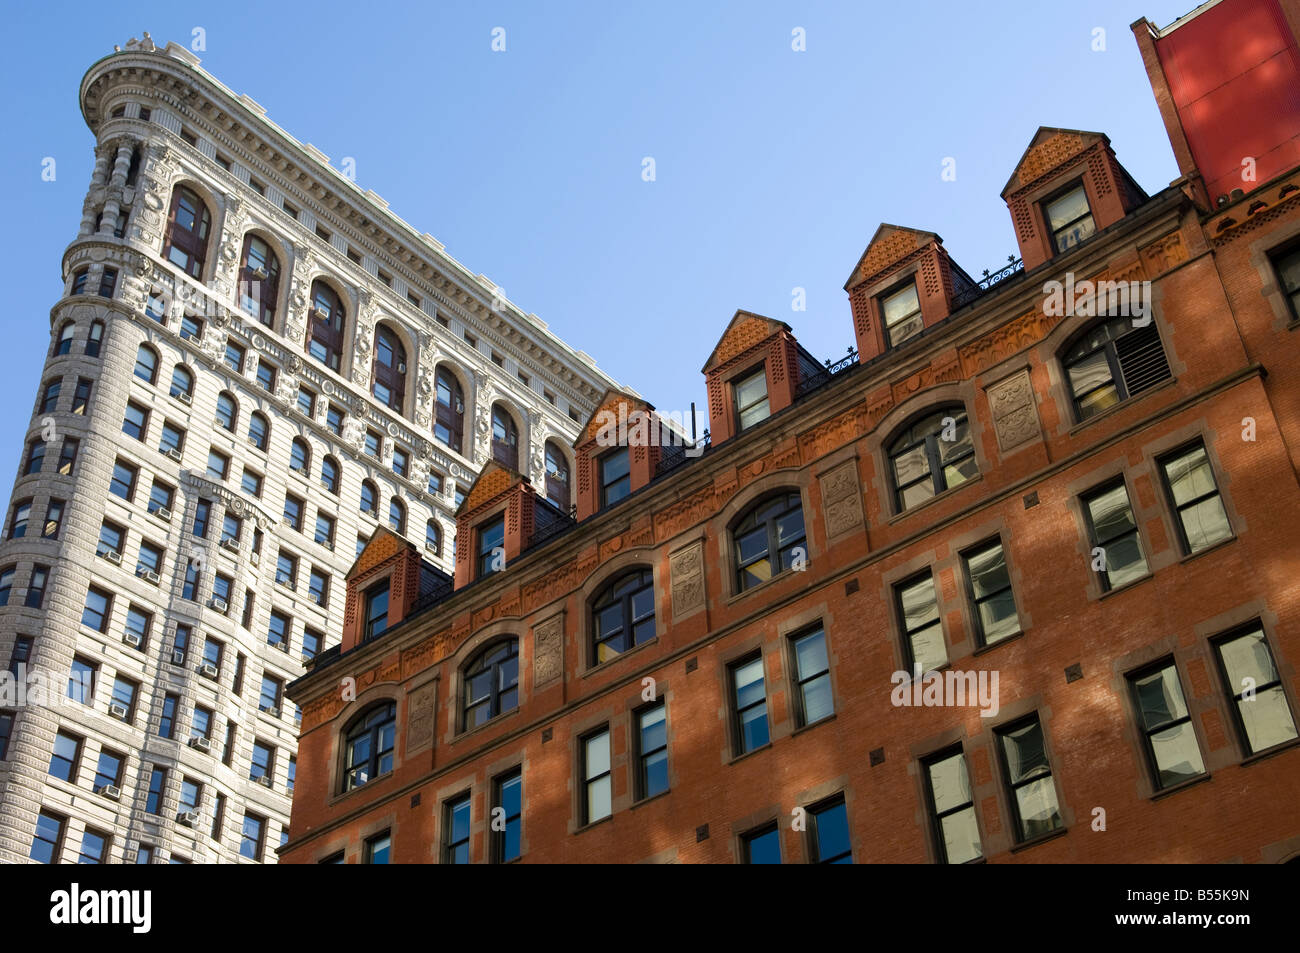 Western union building new york hi-res stock photography and images - Alamy